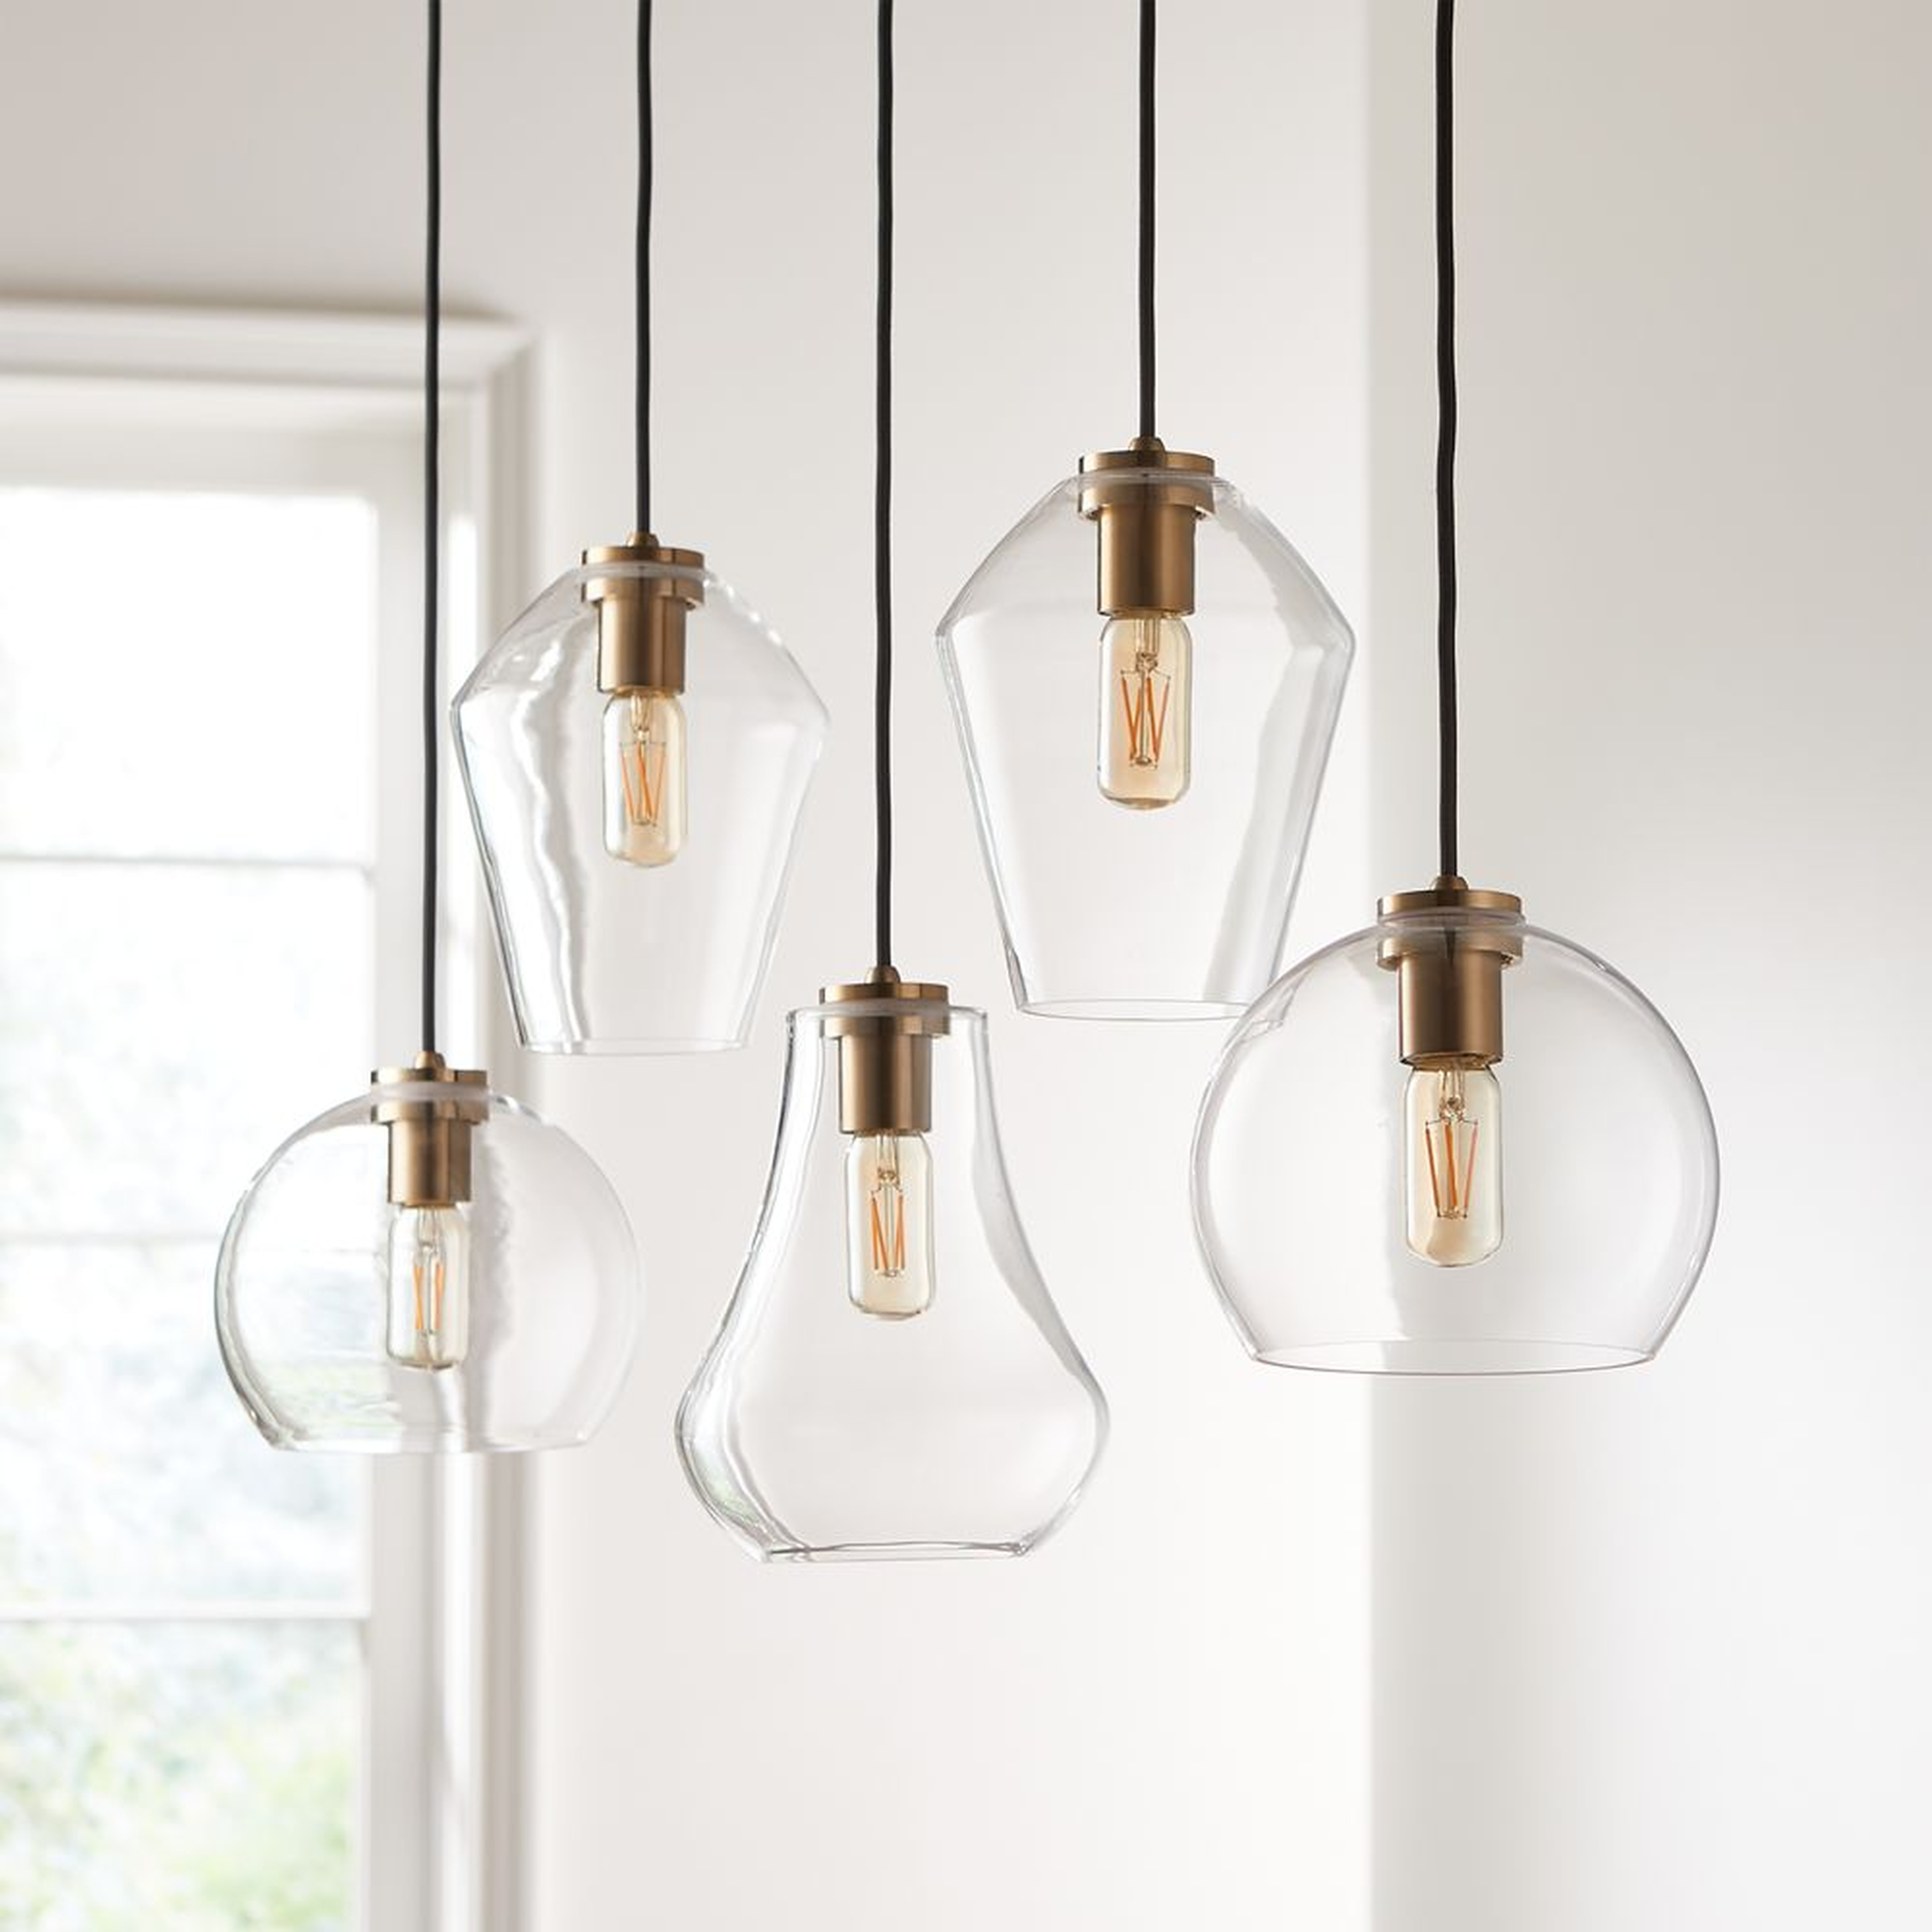 Arren Brass 5-Light Linear Pendant with Mixed Clear Glass Shades - Crate and Barrel